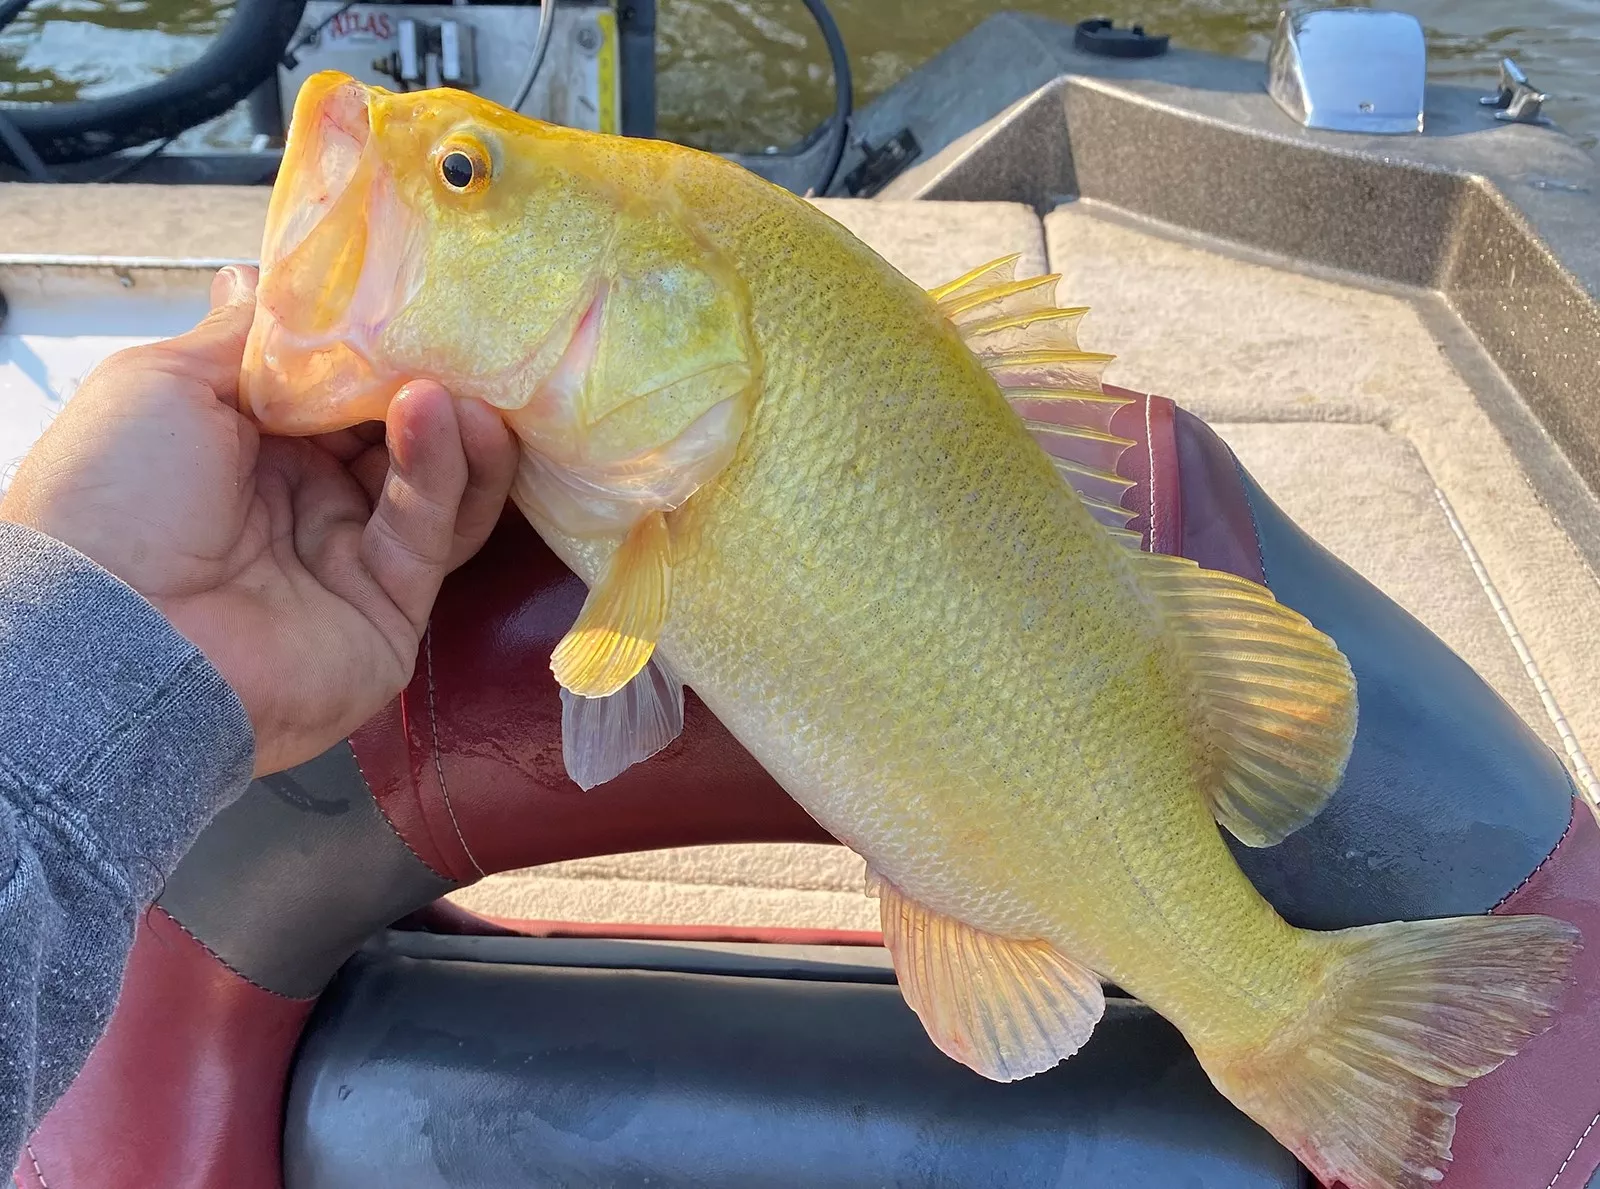 Extremely Rare Fish With Mutation Caught in Virginia, Returned to River